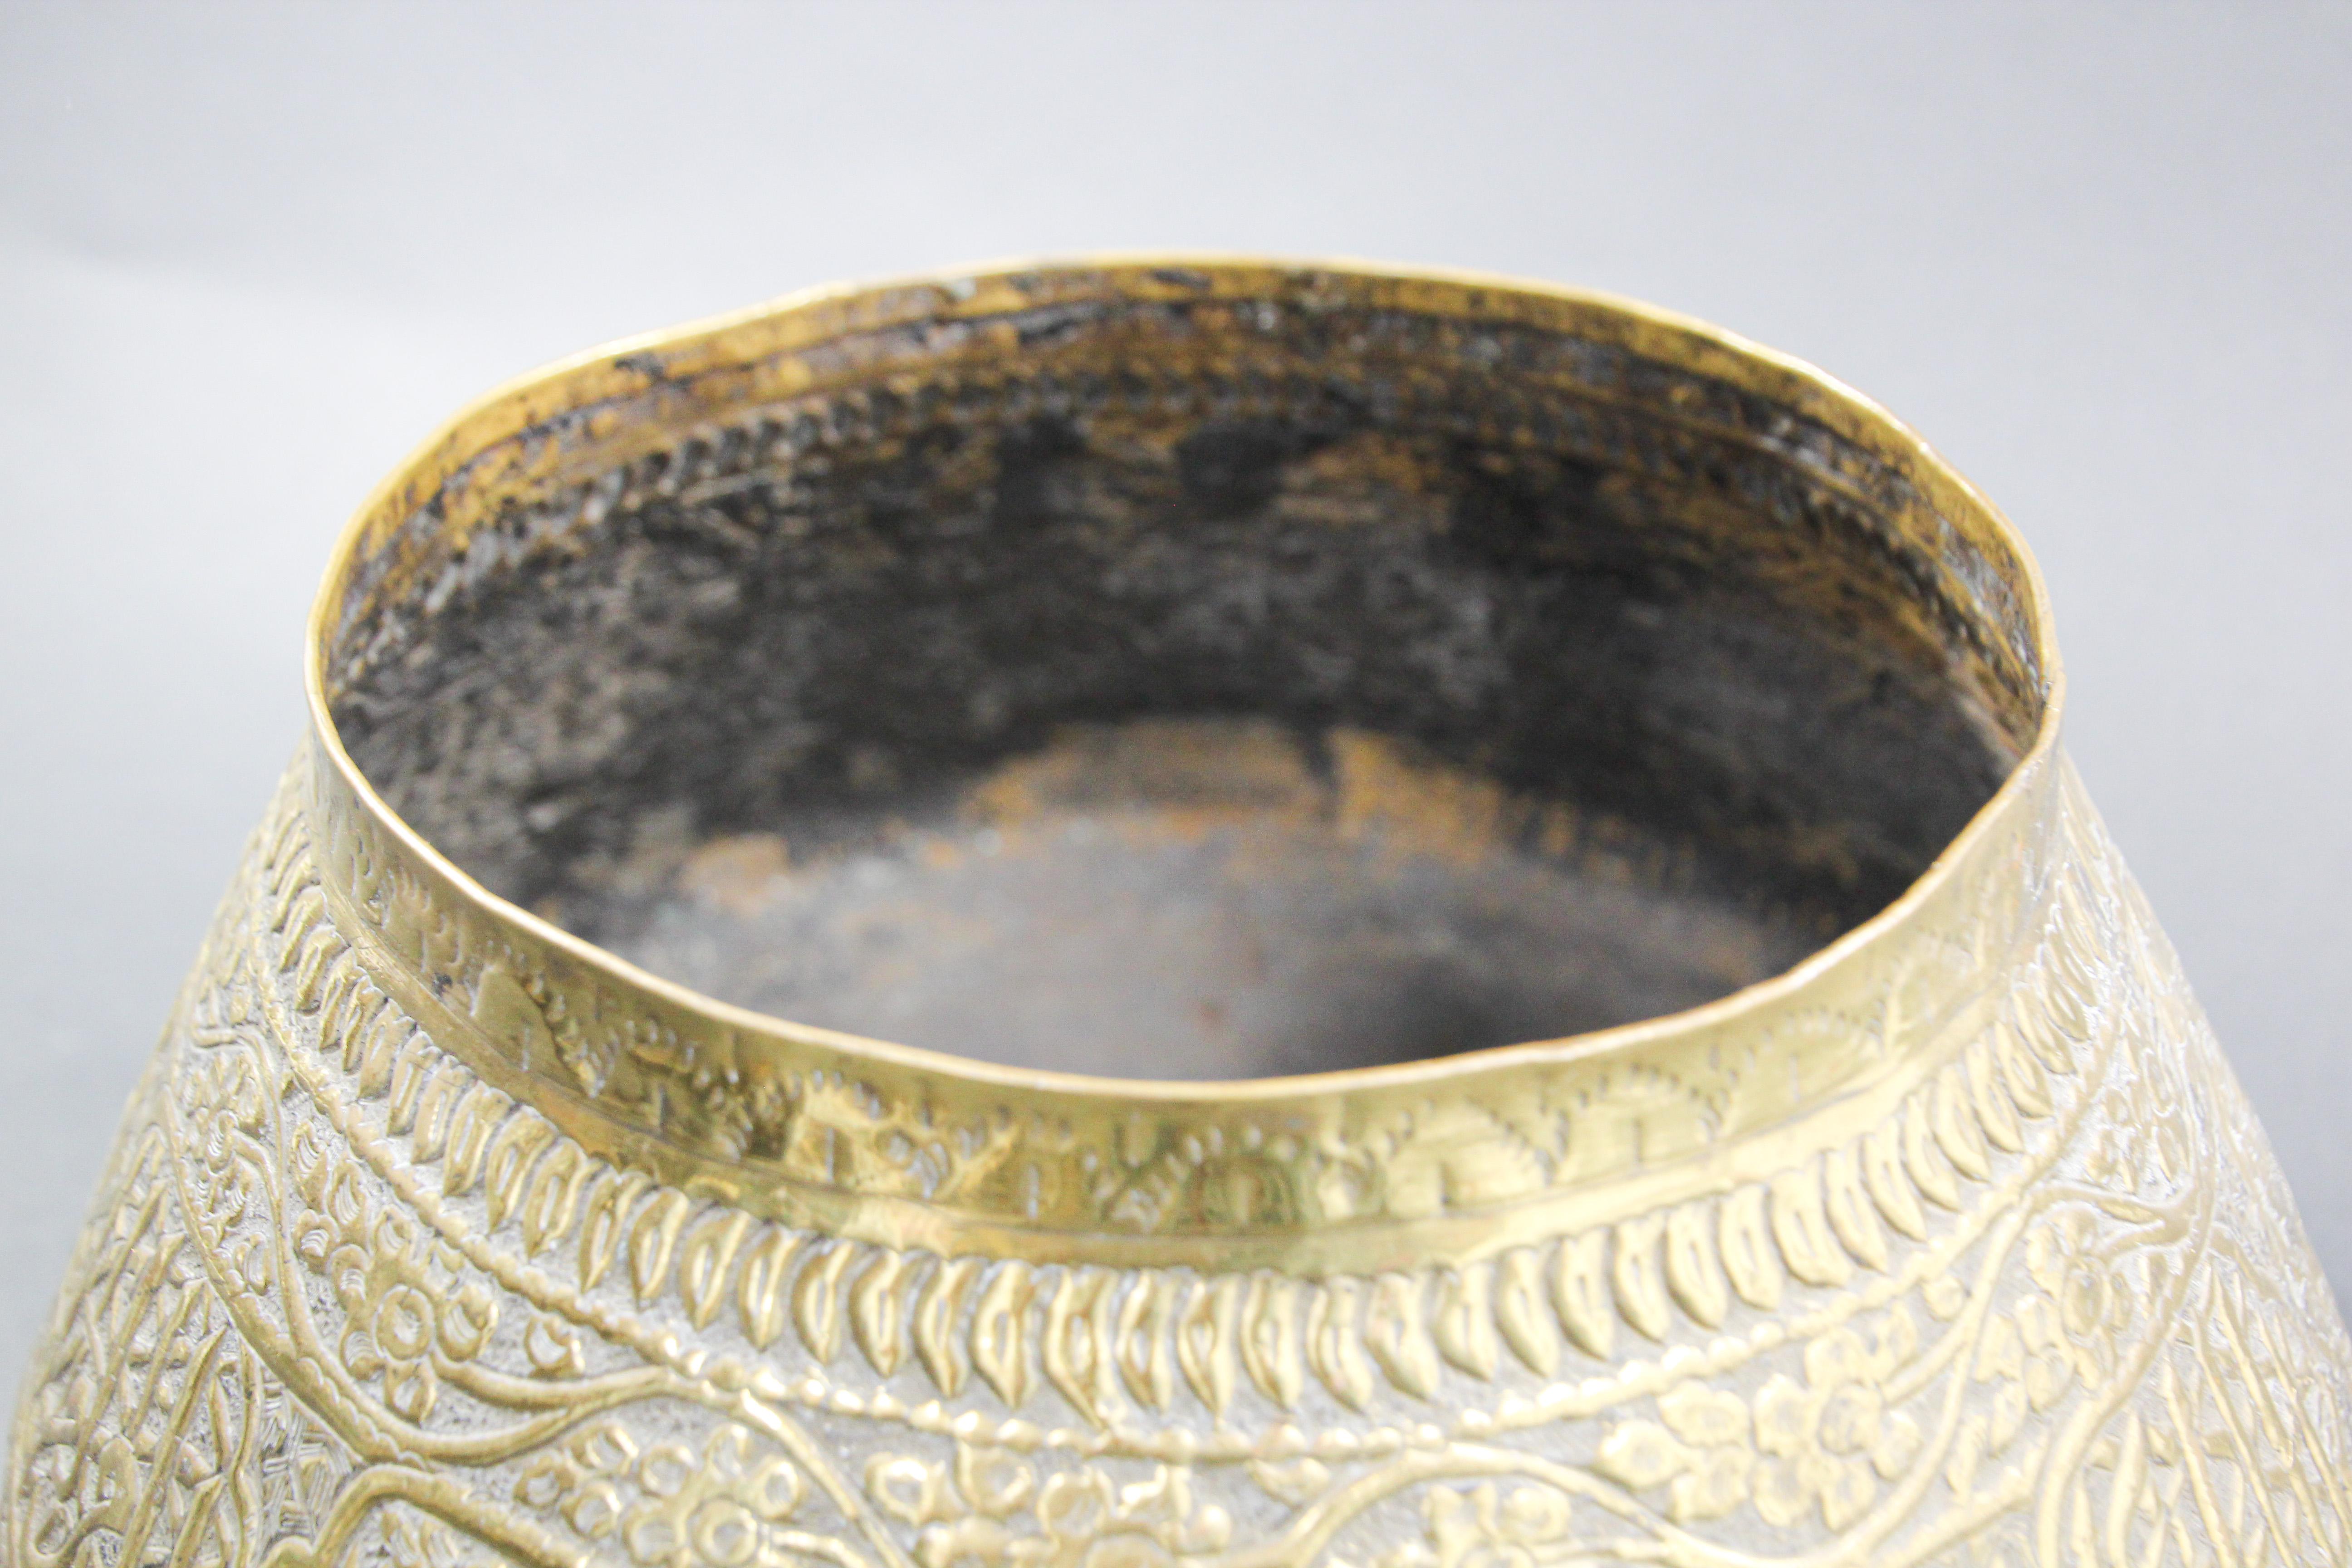 Middle Eastern Brass Bowl with Arabic Calligraphy Writing In Good Condition For Sale In North Hollywood, CA